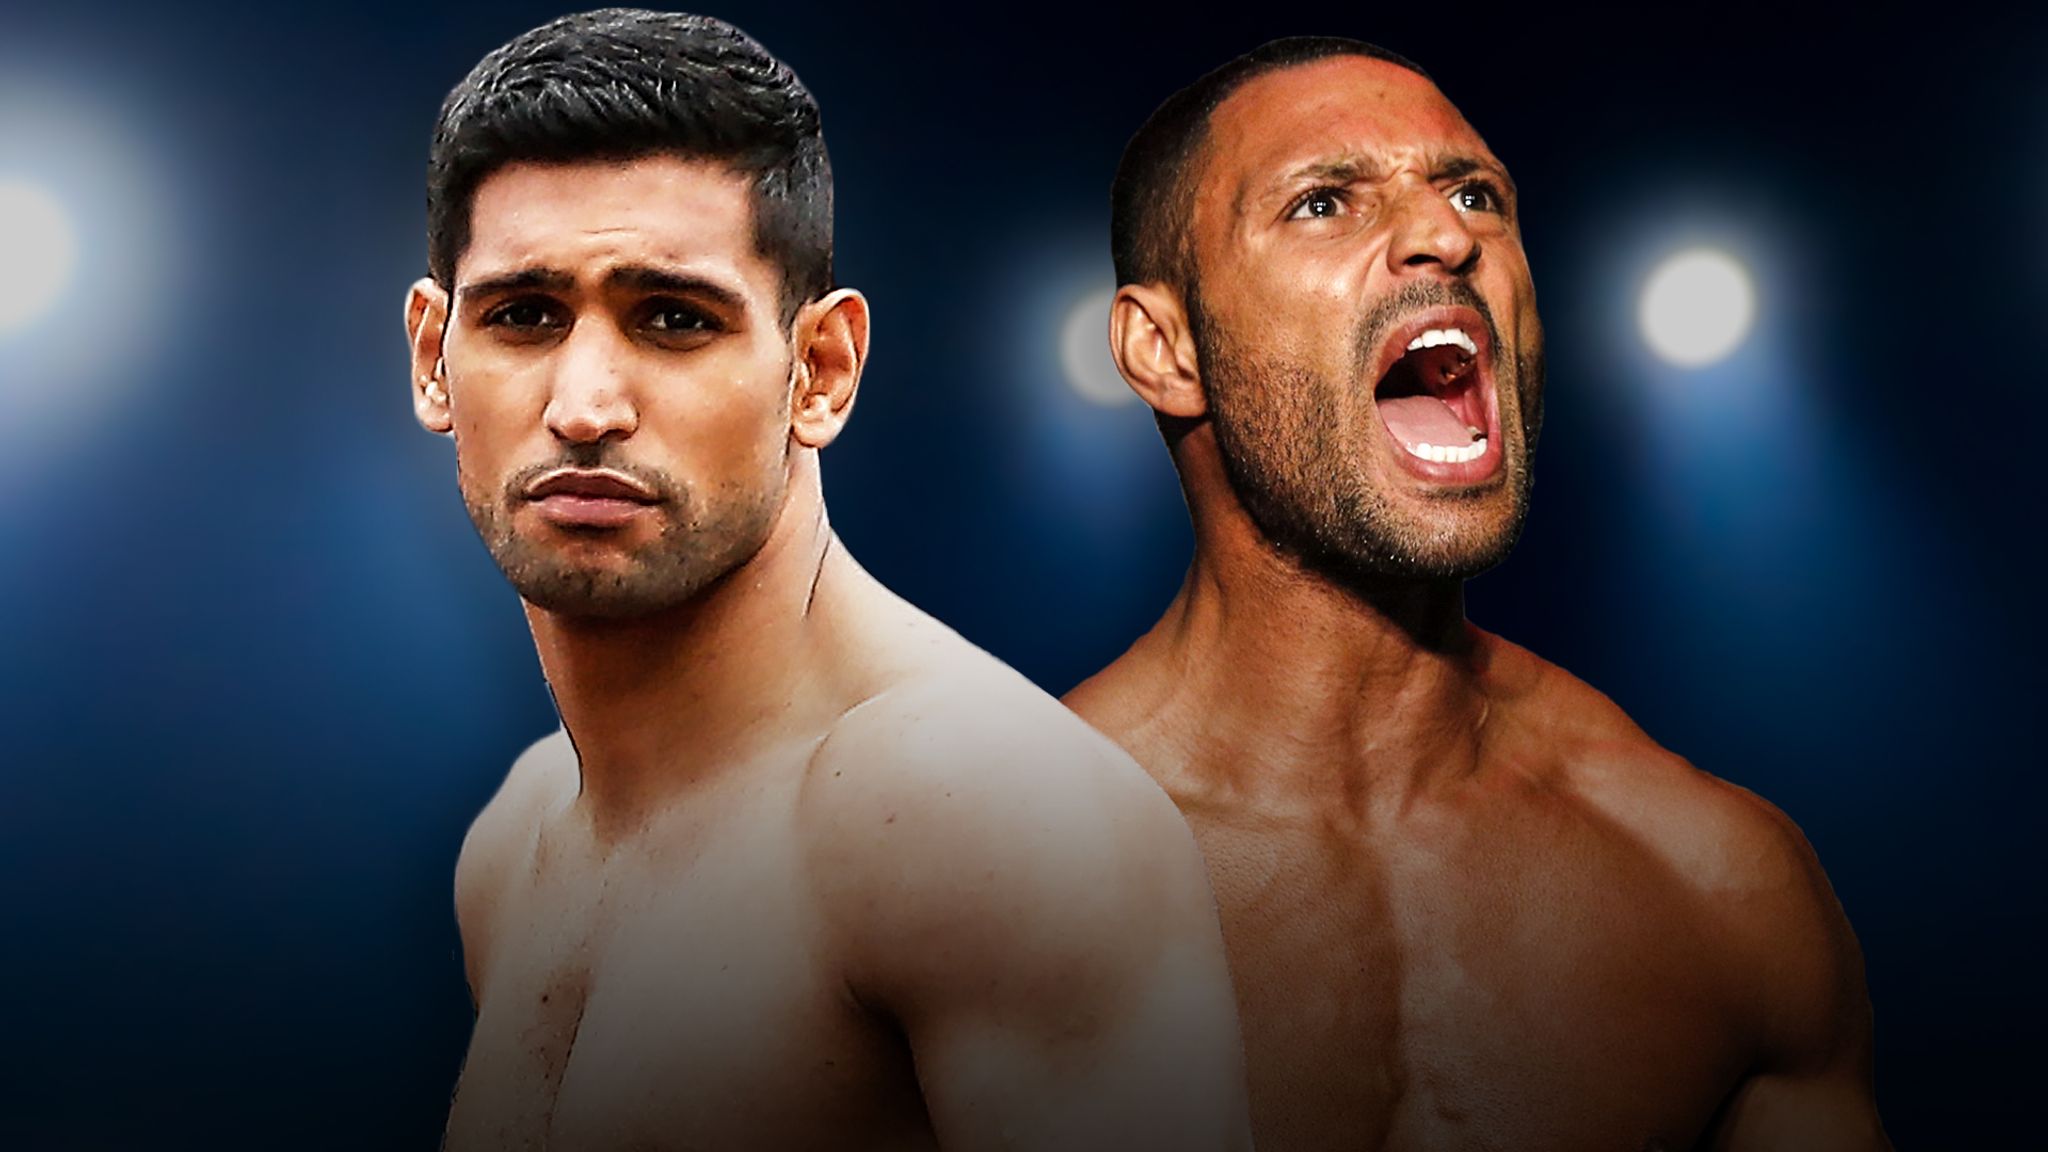 Khan vs Lo Greco Amir Khan and Kell Brook rolled the dice in careers which could finally collide in 2018 Boxing News Sky Sports